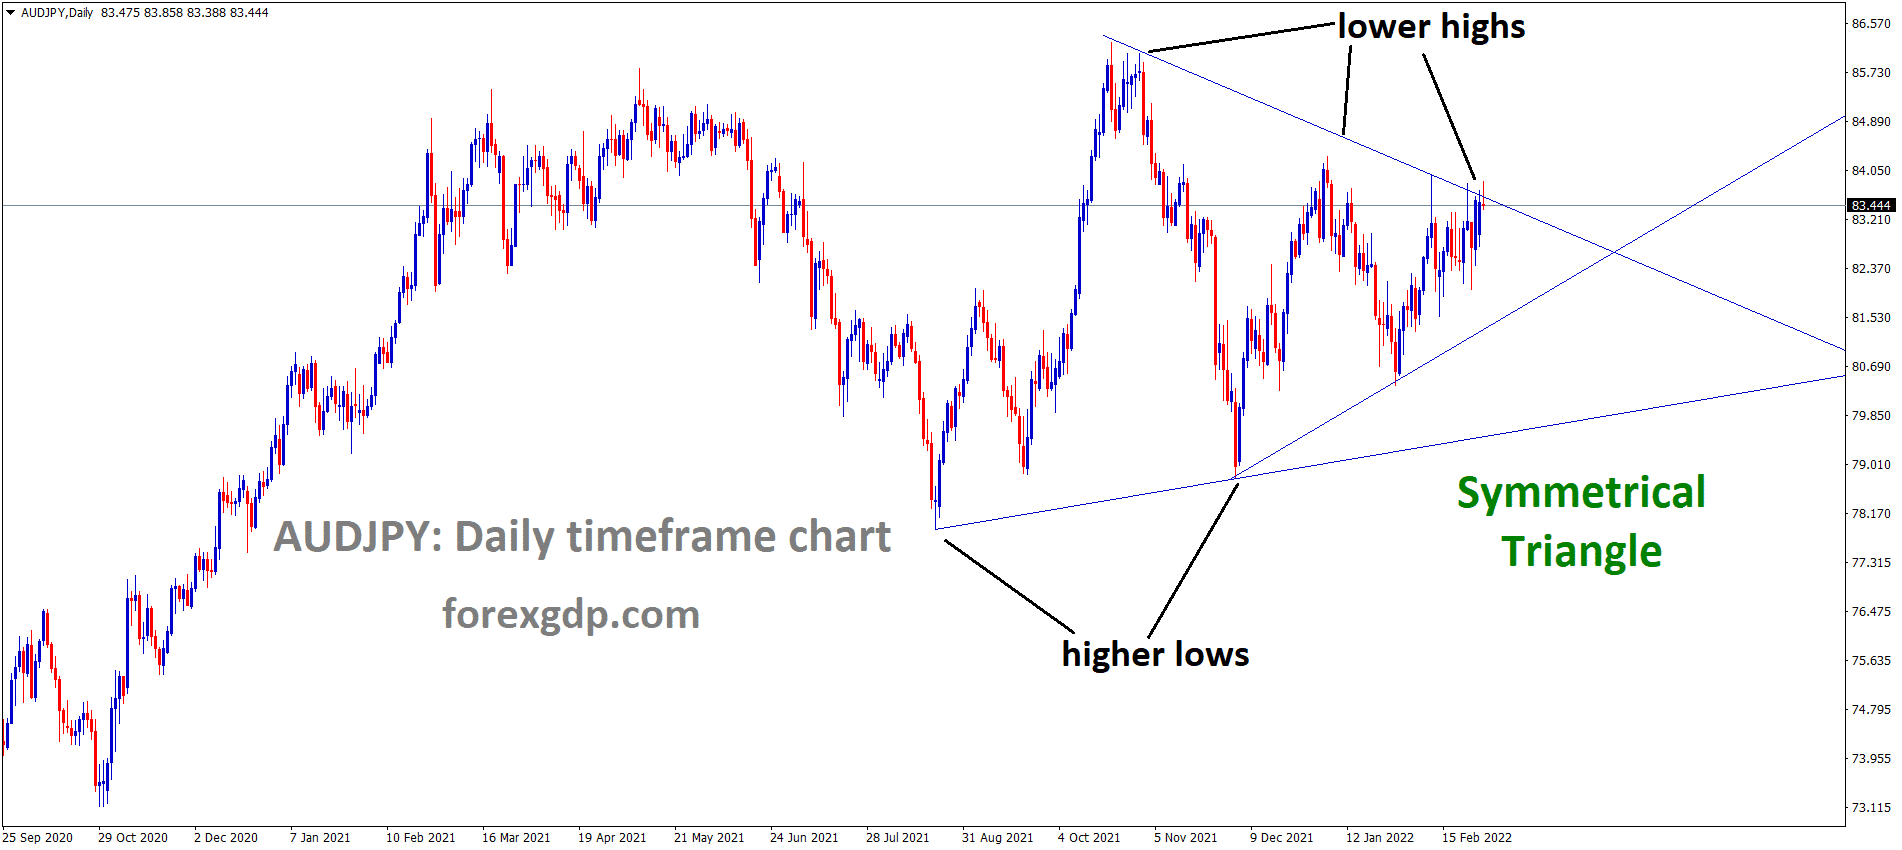 AUDJPY is moving in the Symmetrical triangle pattern and the market has reached the Top area of the Triangle pattern